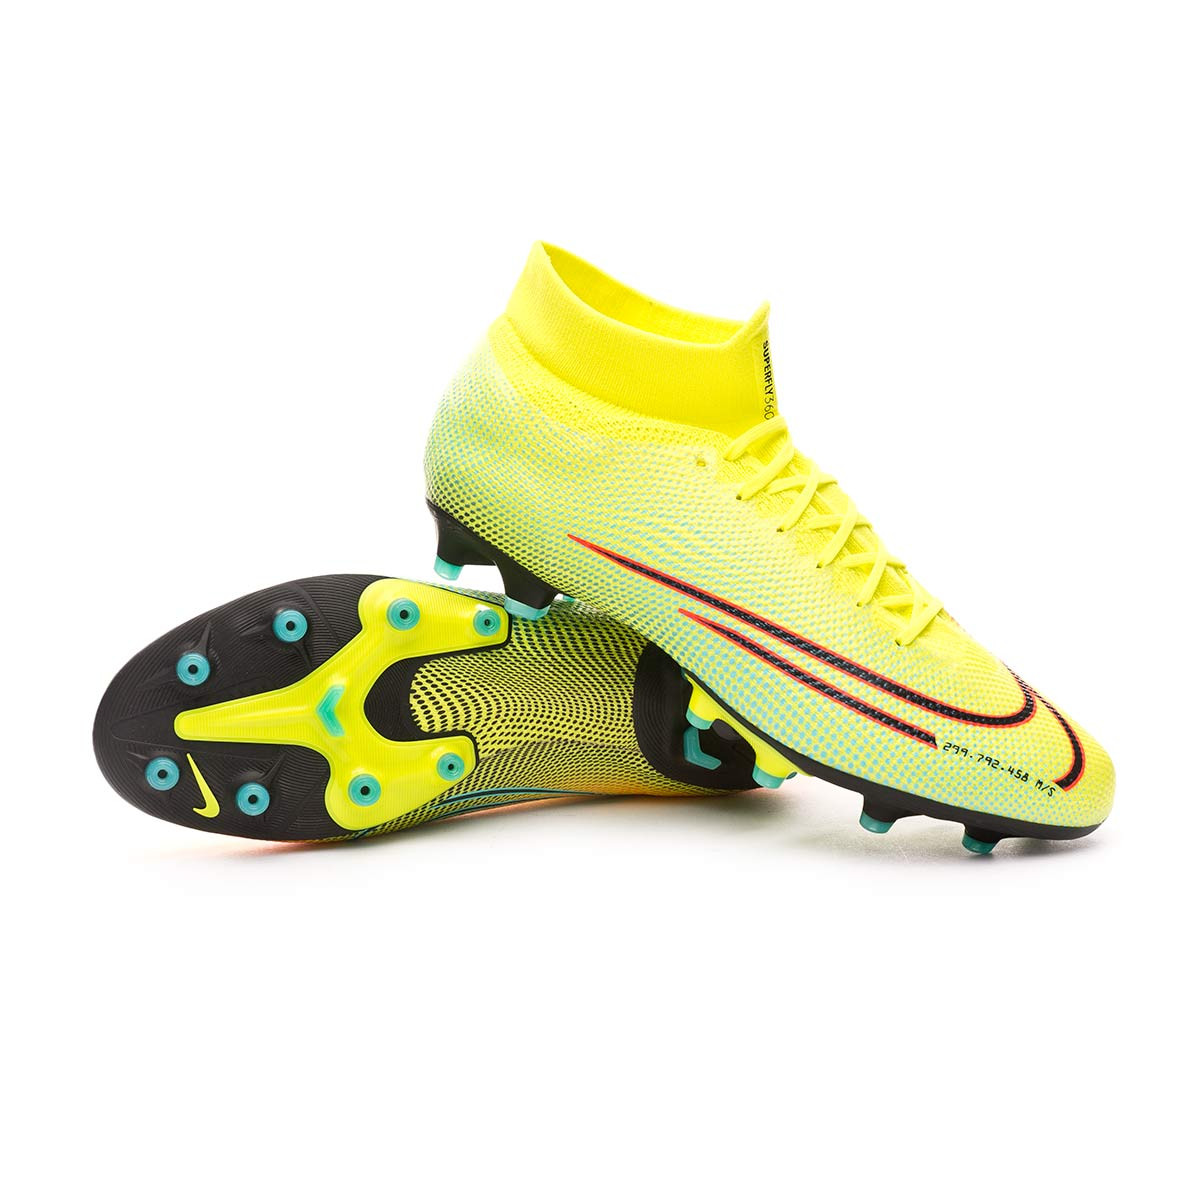 Nike Mercurial Superfly 7 Elite MDS AG PRO Artificial Grass.